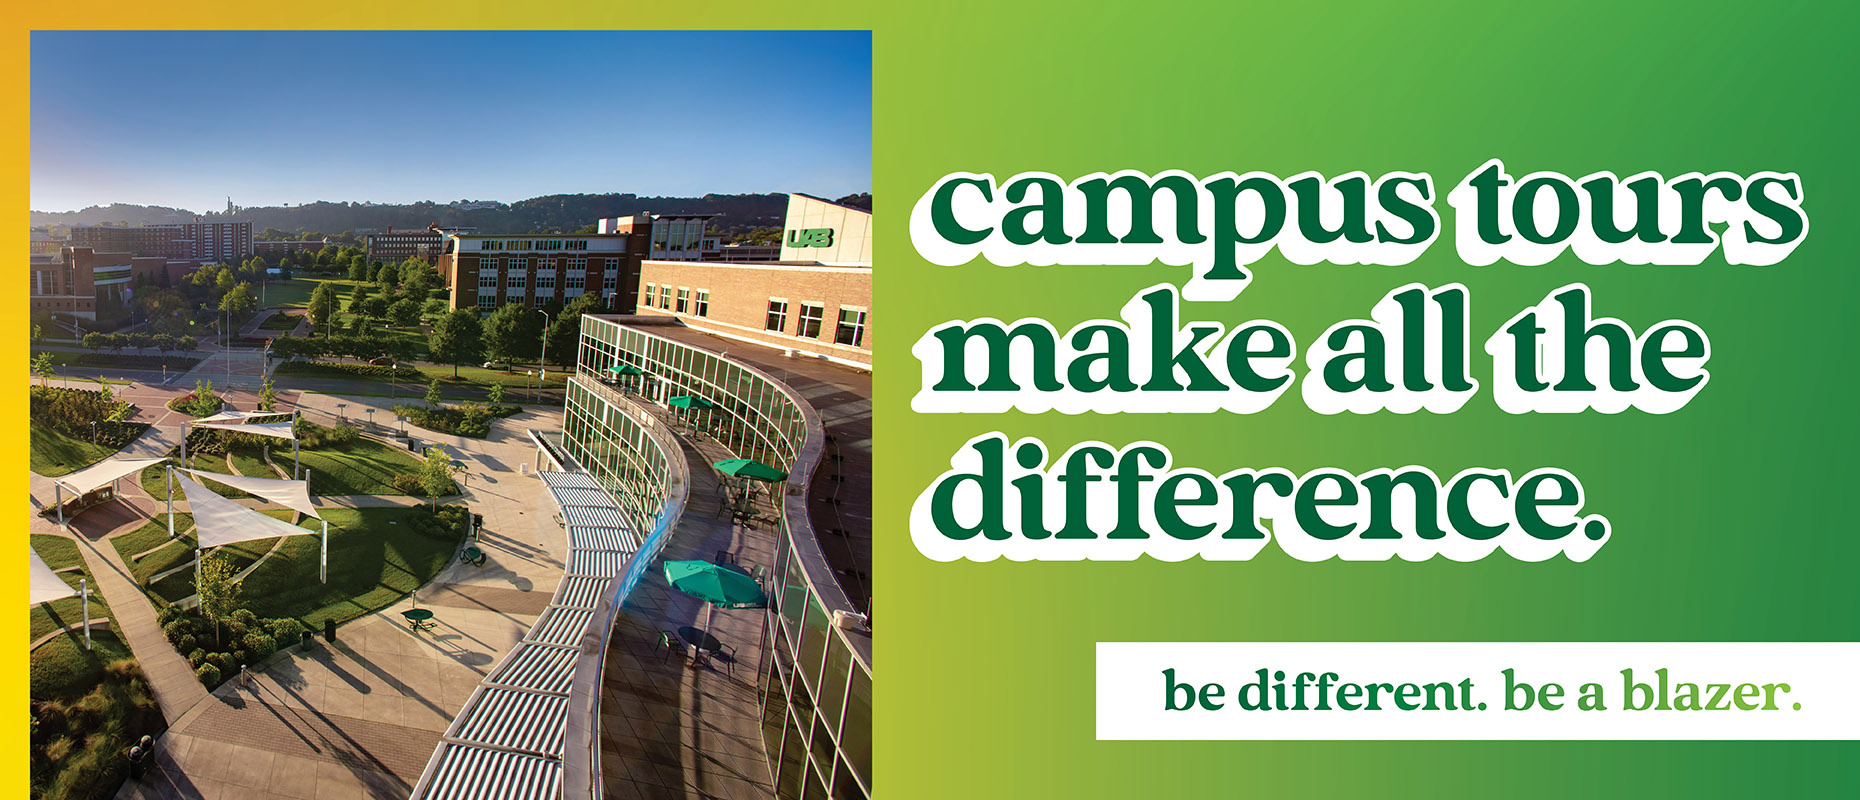 Campus tours make all the difference. Be different. Be a Blazer.